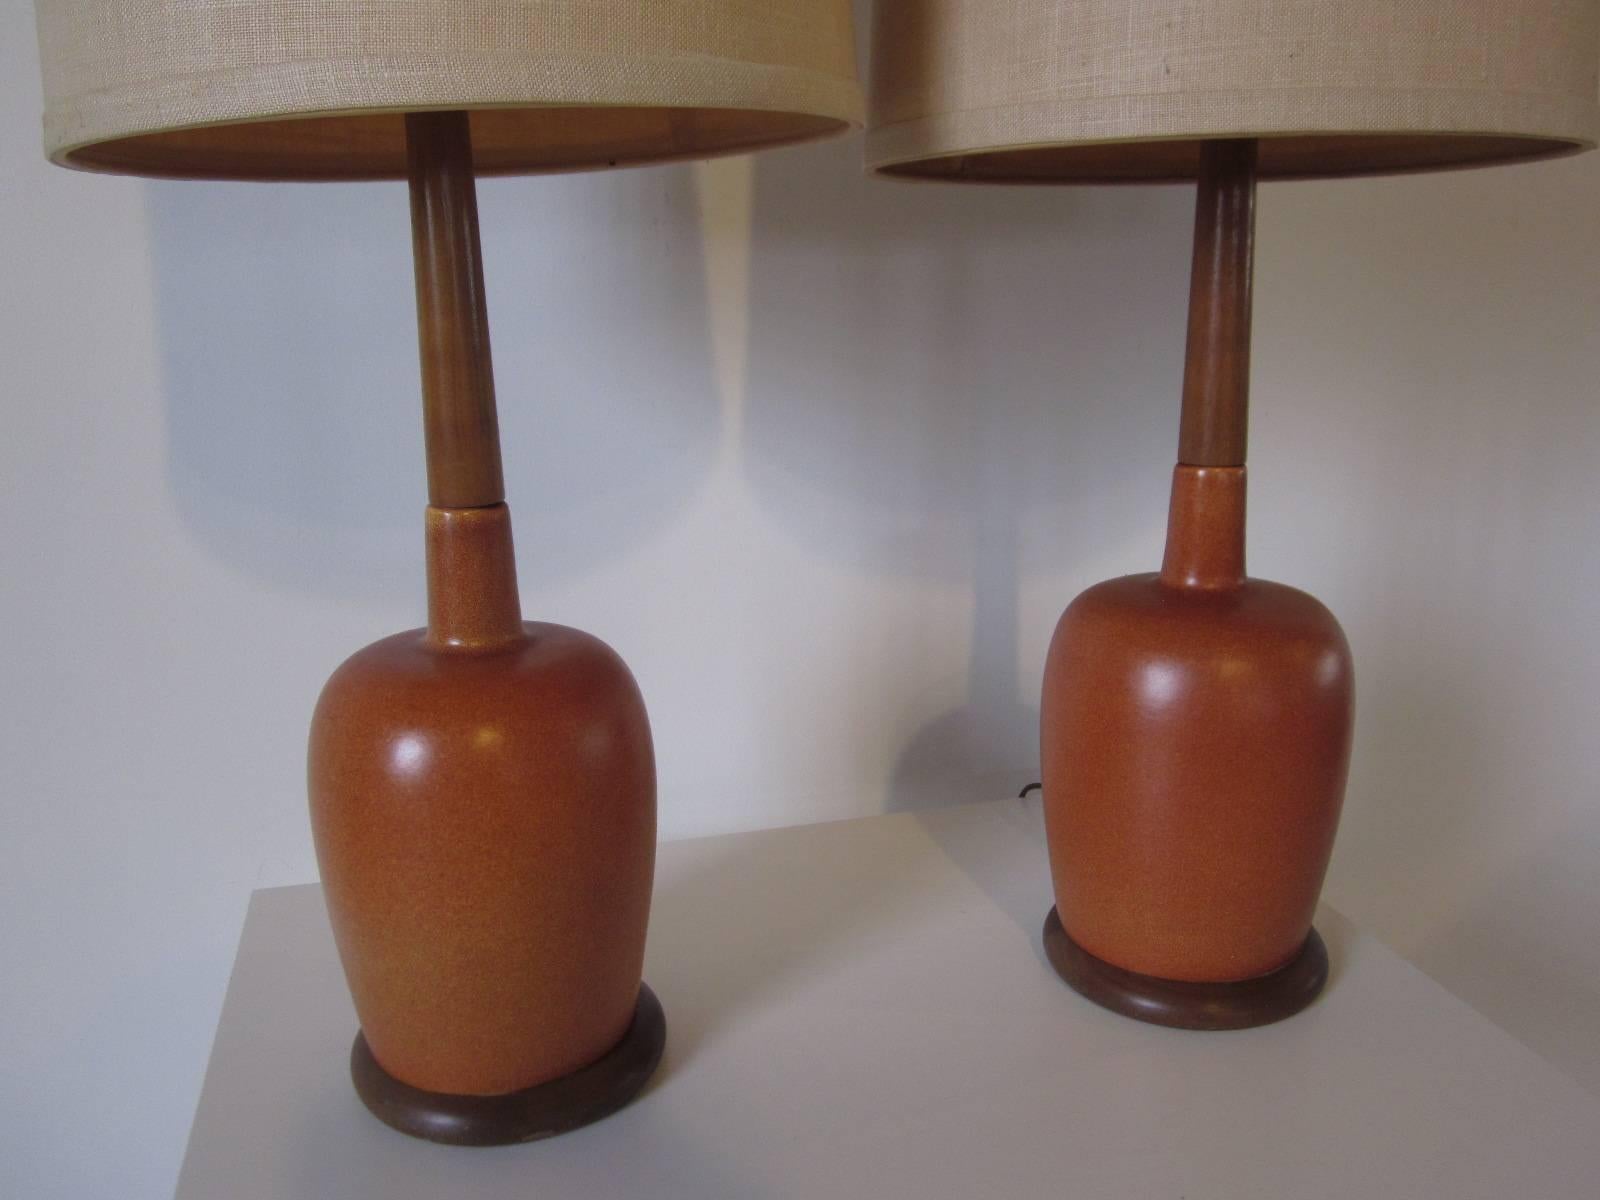 A pair of burnt orange / rust toned pottery table lamps with teak wood base plate and stem topped with the original linen shades, made in Denmark .